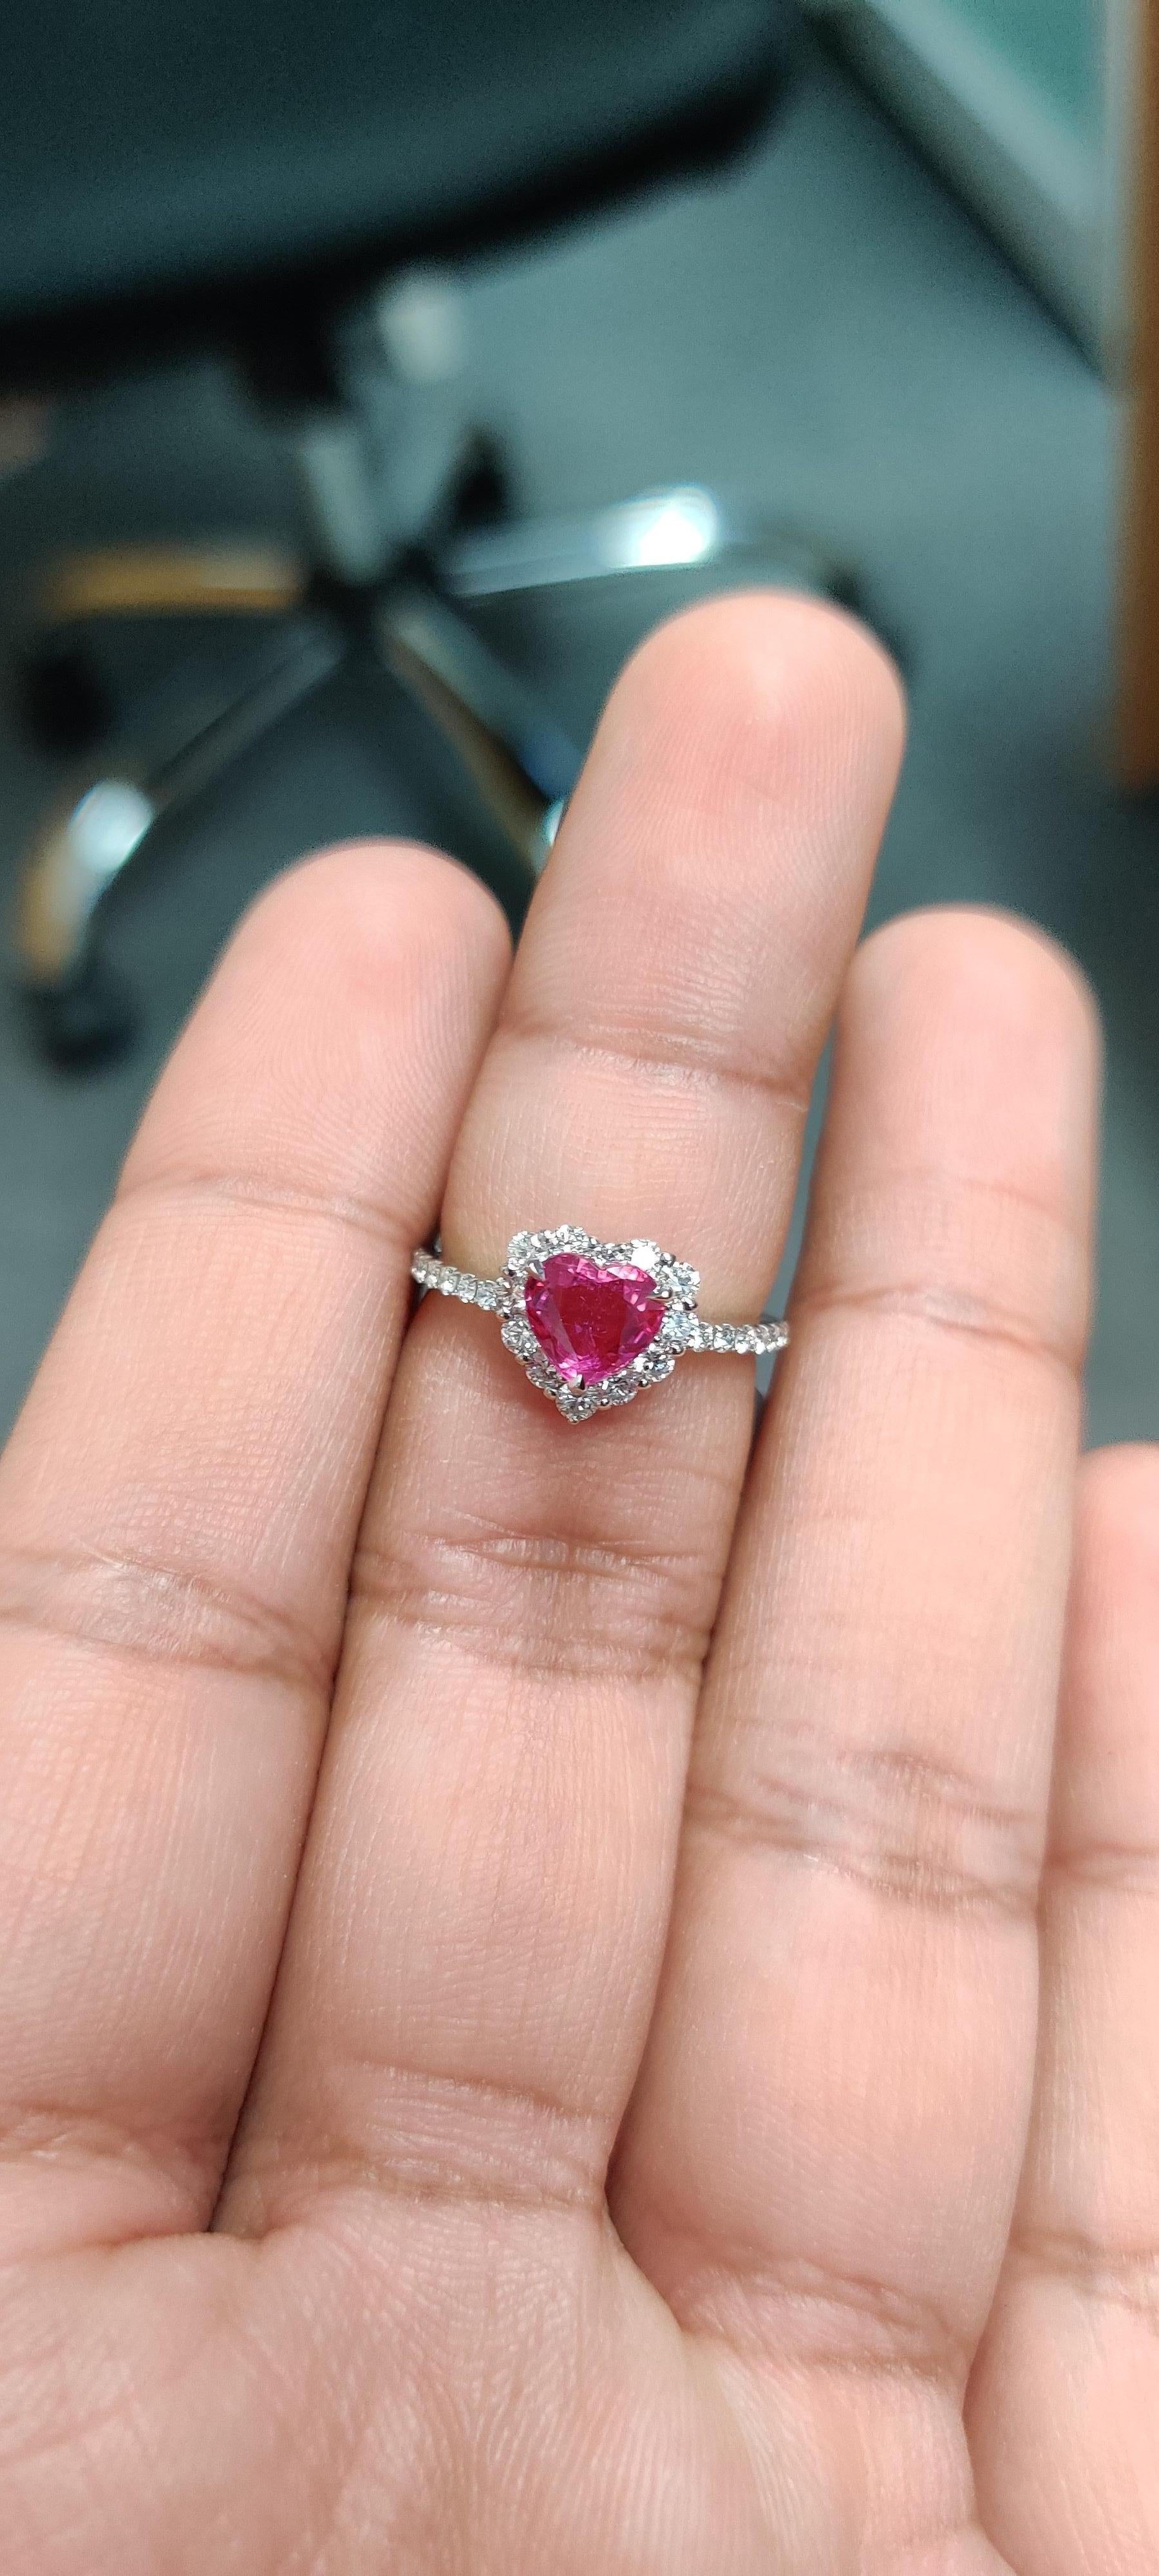 Women's 1.23 Carat Heart Shaped Ruby Ring in Platinum 900 For Sale